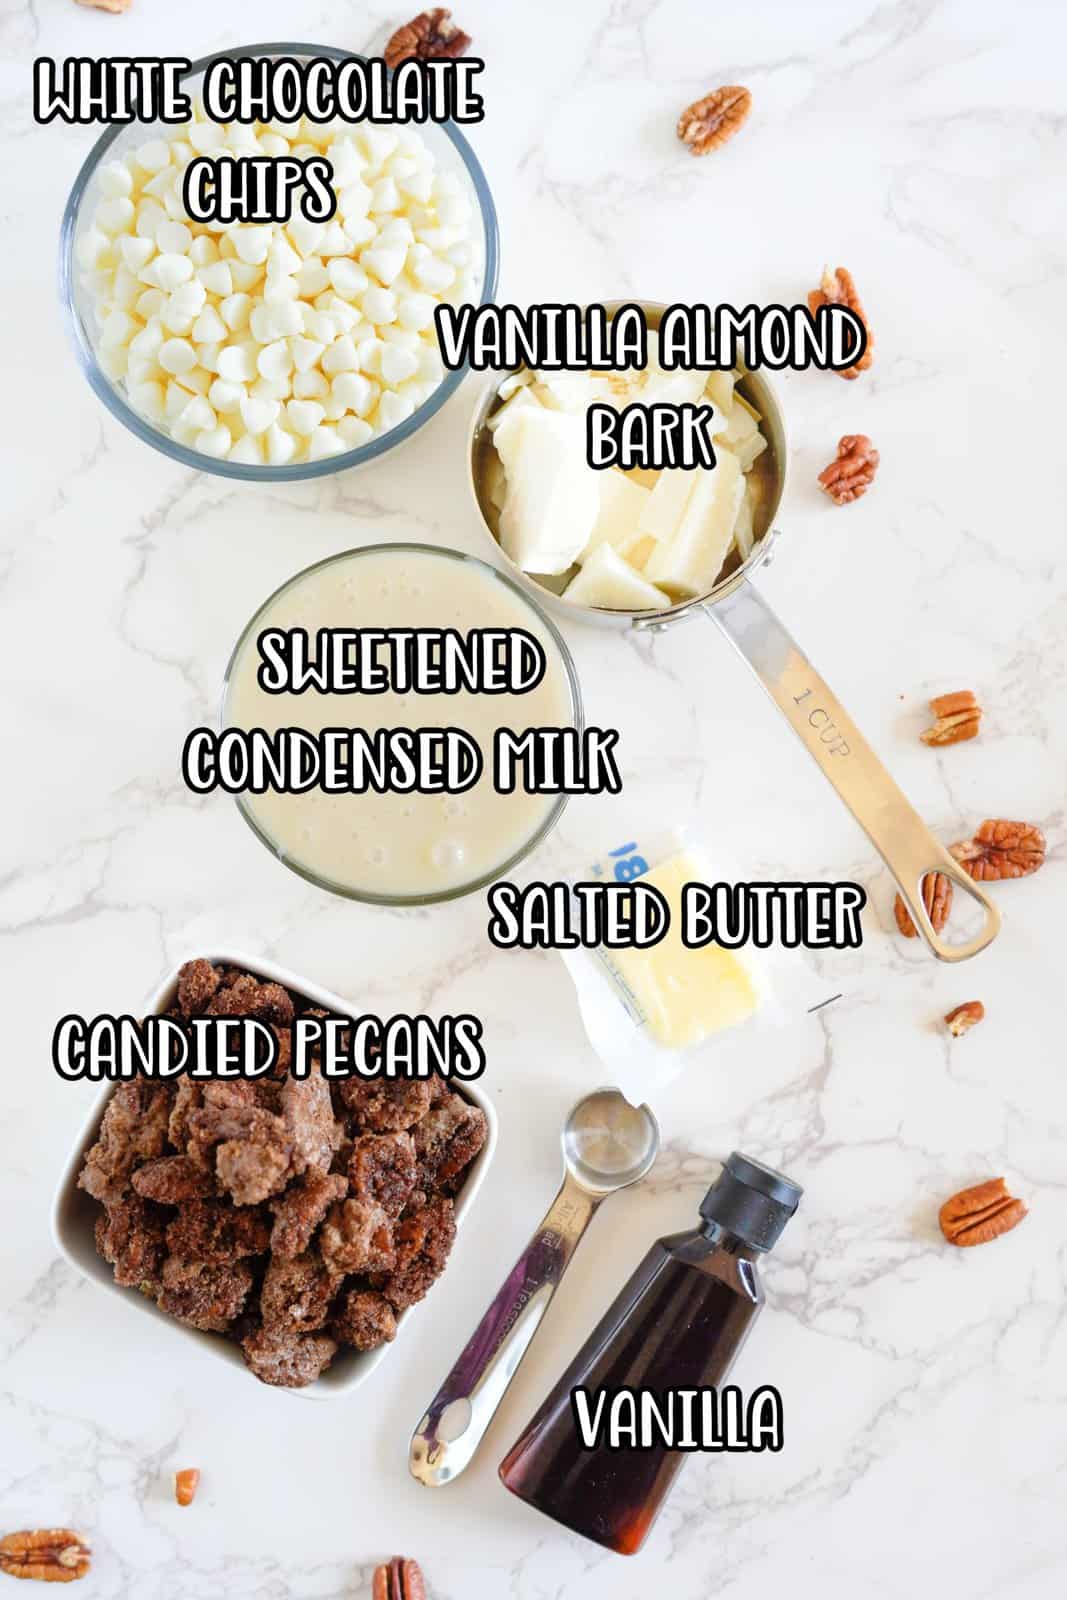 Butter, white chocolate chips, sweetened condensed milk, vanilla extract, candied pecans, and vanilla almond bark.